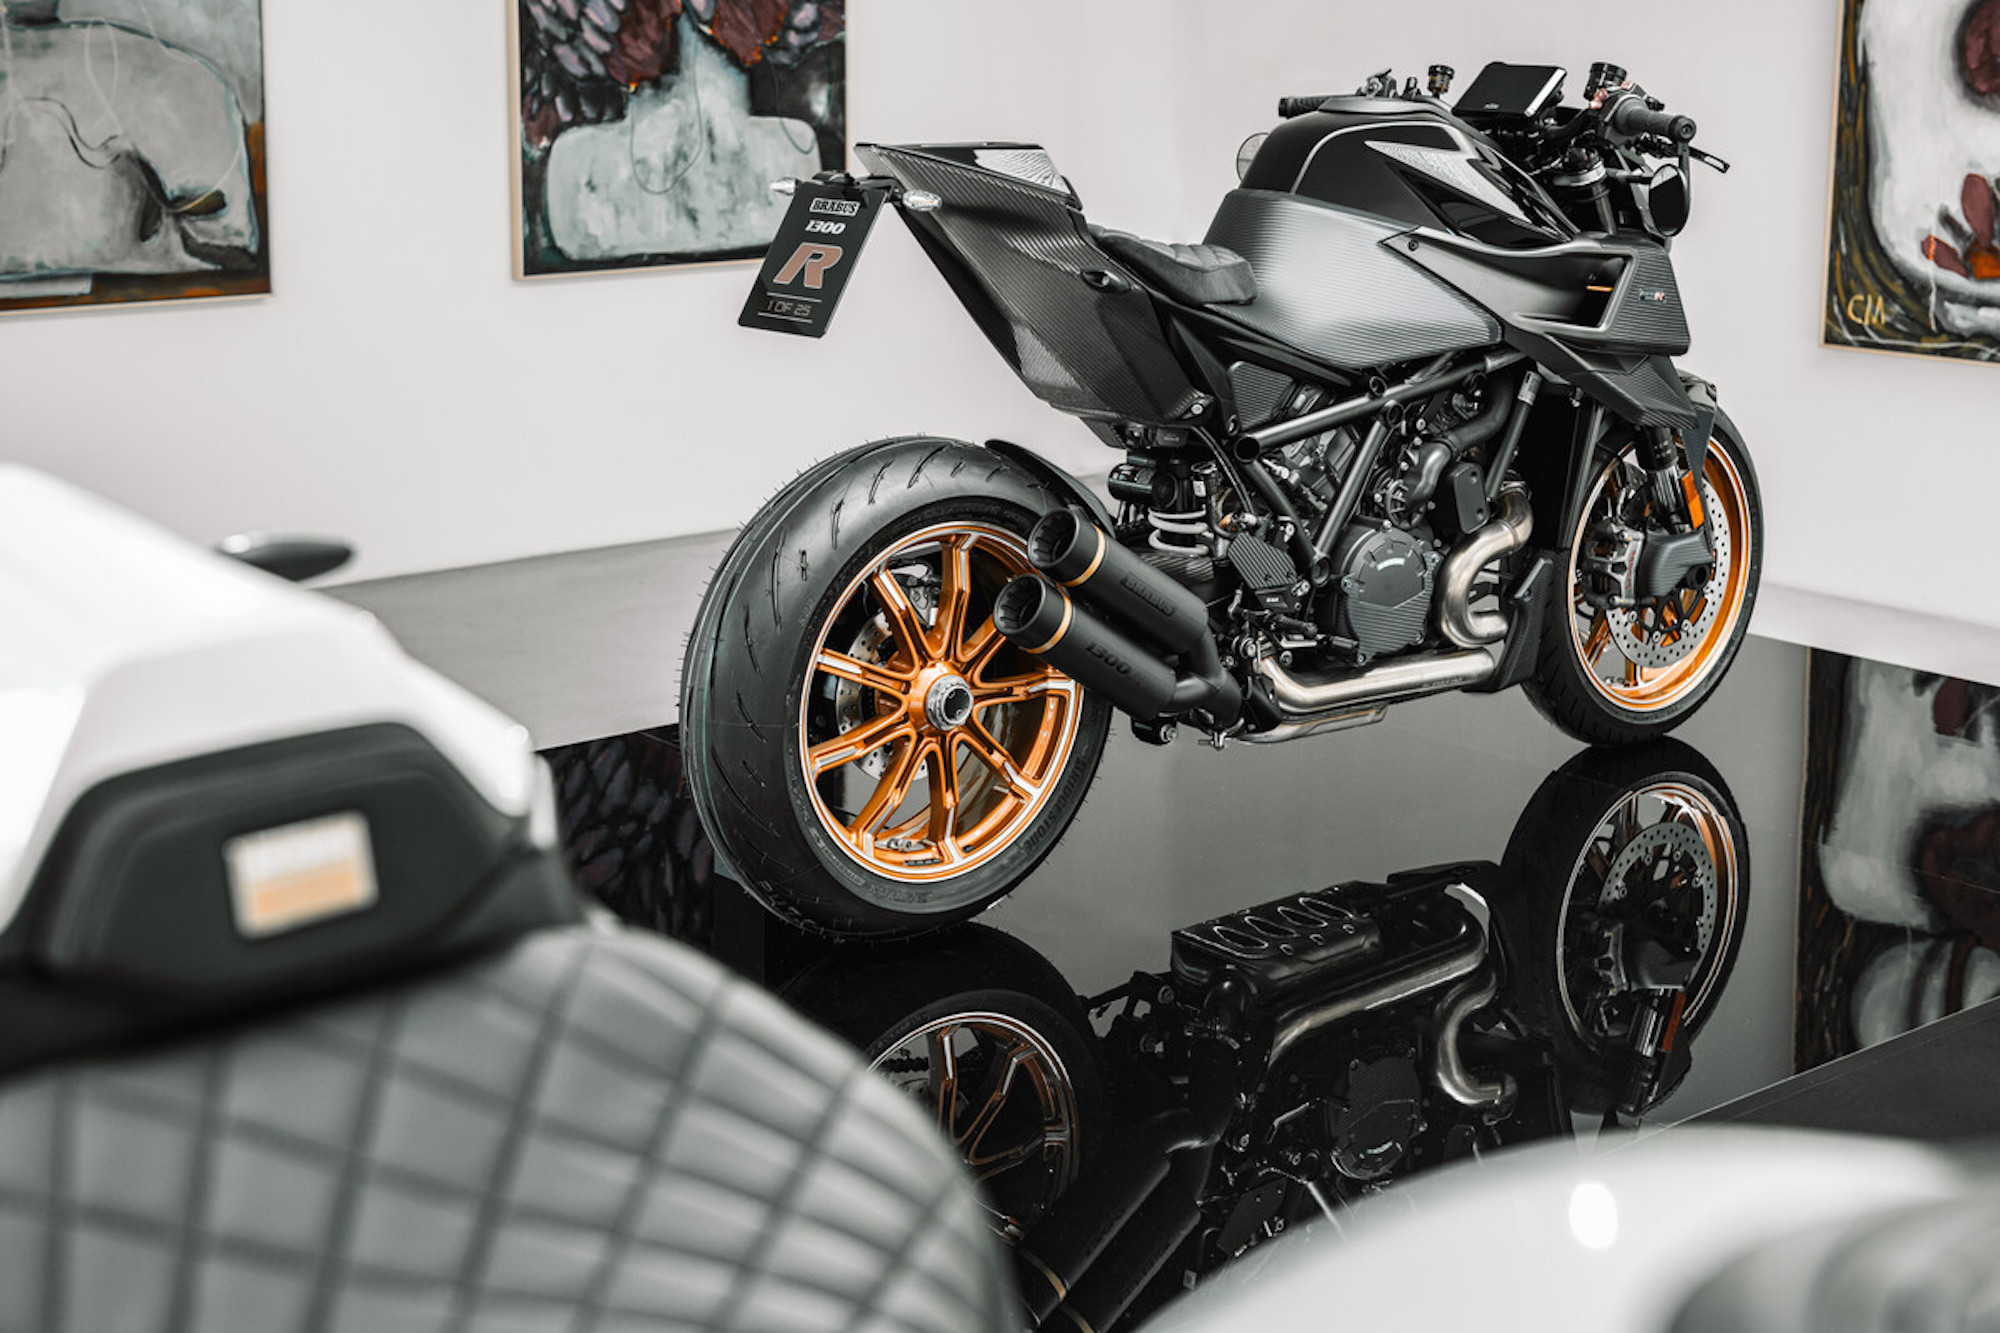 The final round of the KTM/BRABUS collection: The BRABUS 1300 R, Masterpiece Edition. All media provided by KTM's press release, honorable mention to BRABUS.